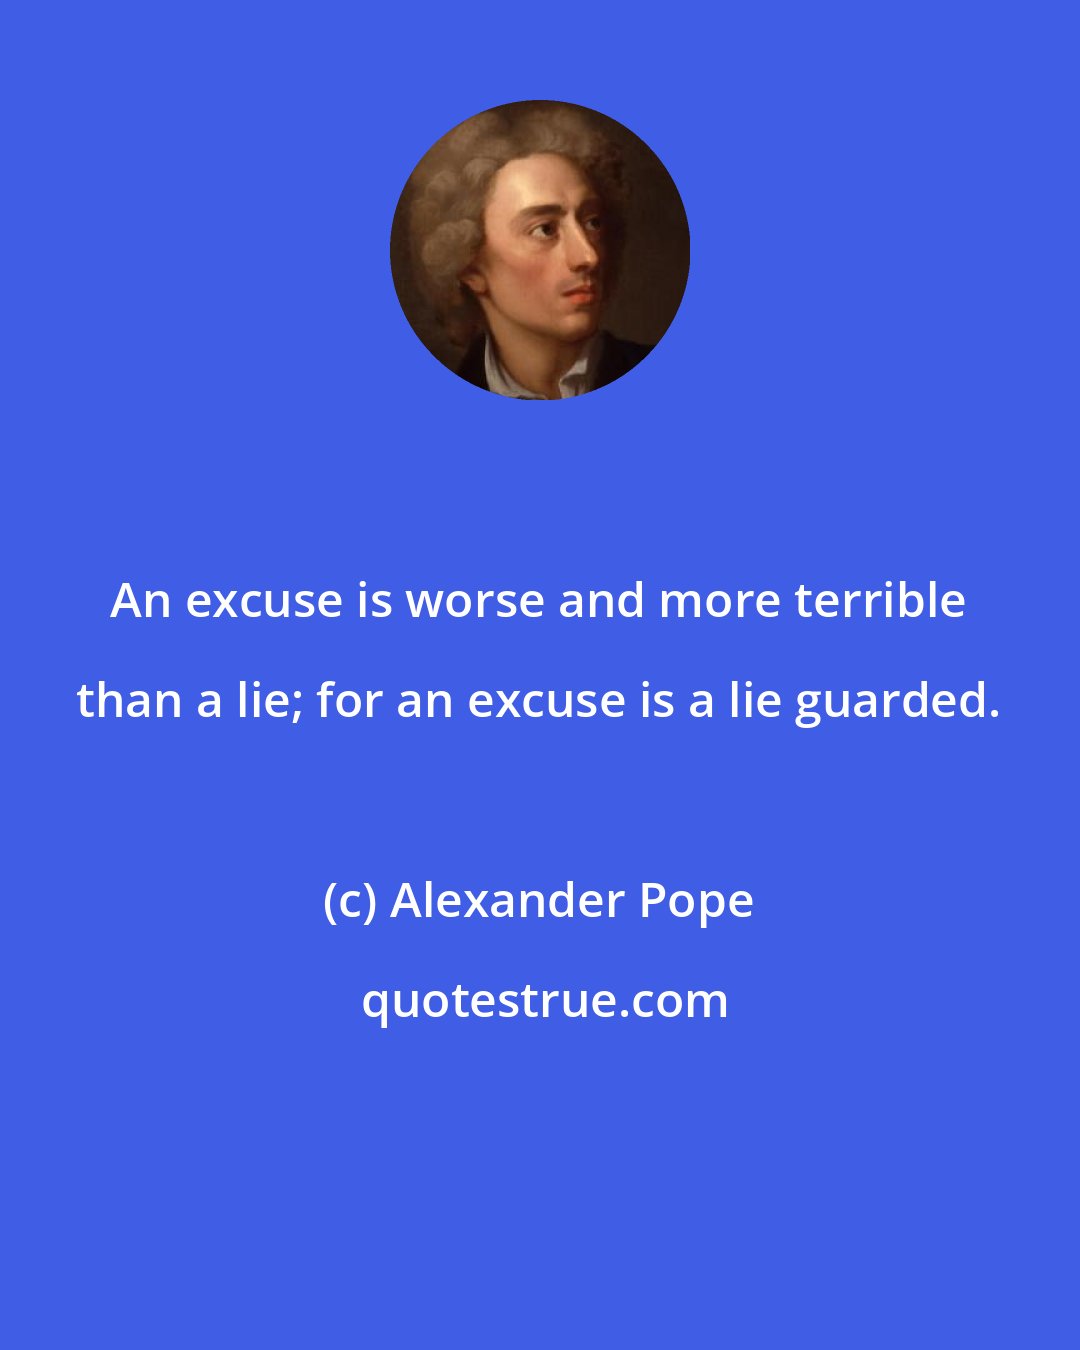 Alexander Pope: An excuse is worse and more terrible than a lie; for an excuse is a lie guarded.